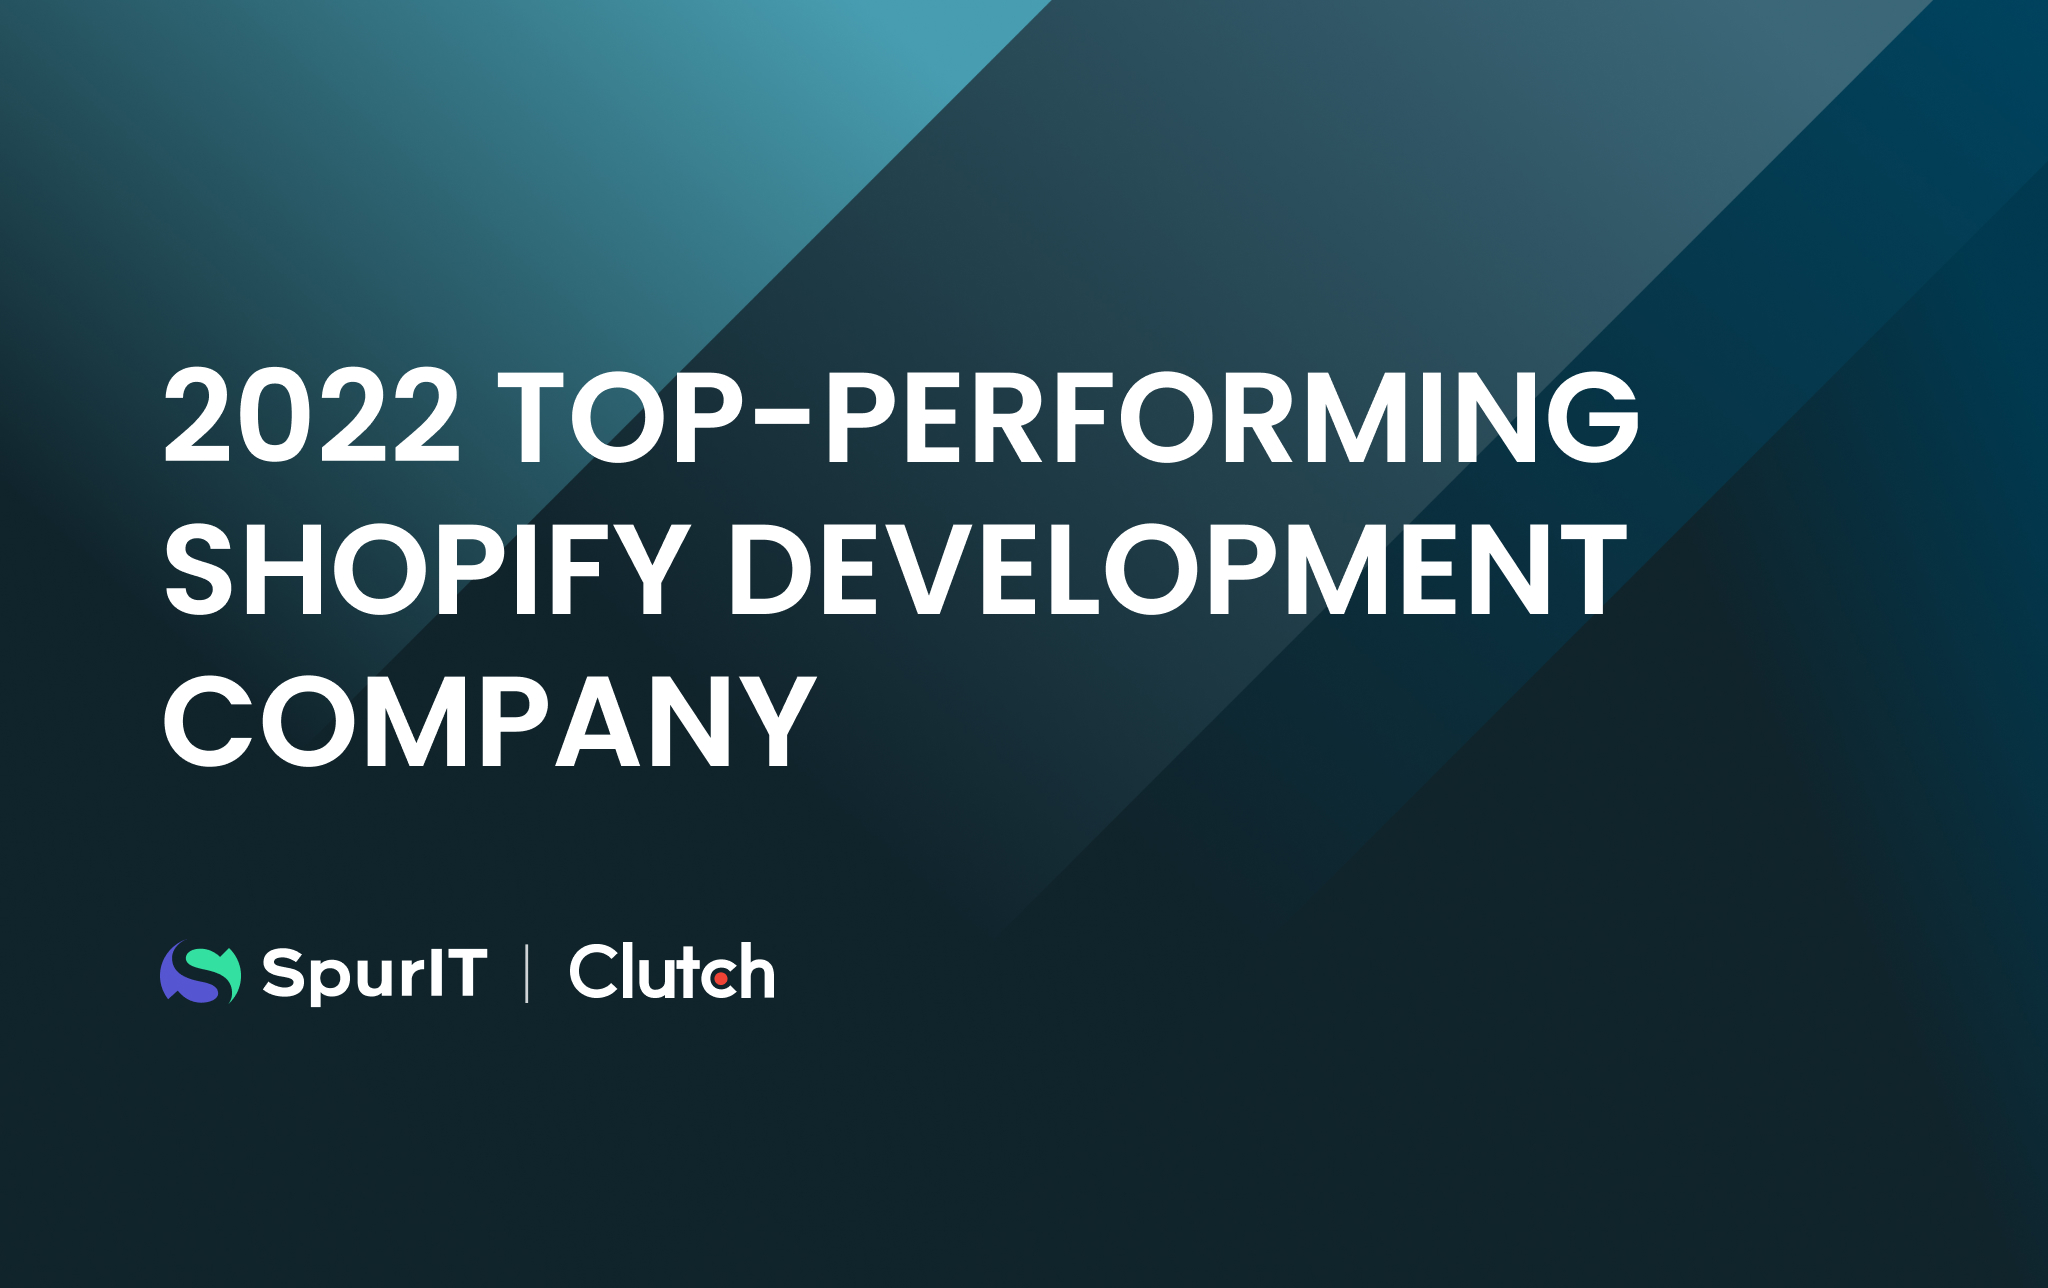 Clutch celebrates SpurIT as 2022’s top-performing Shopify development company